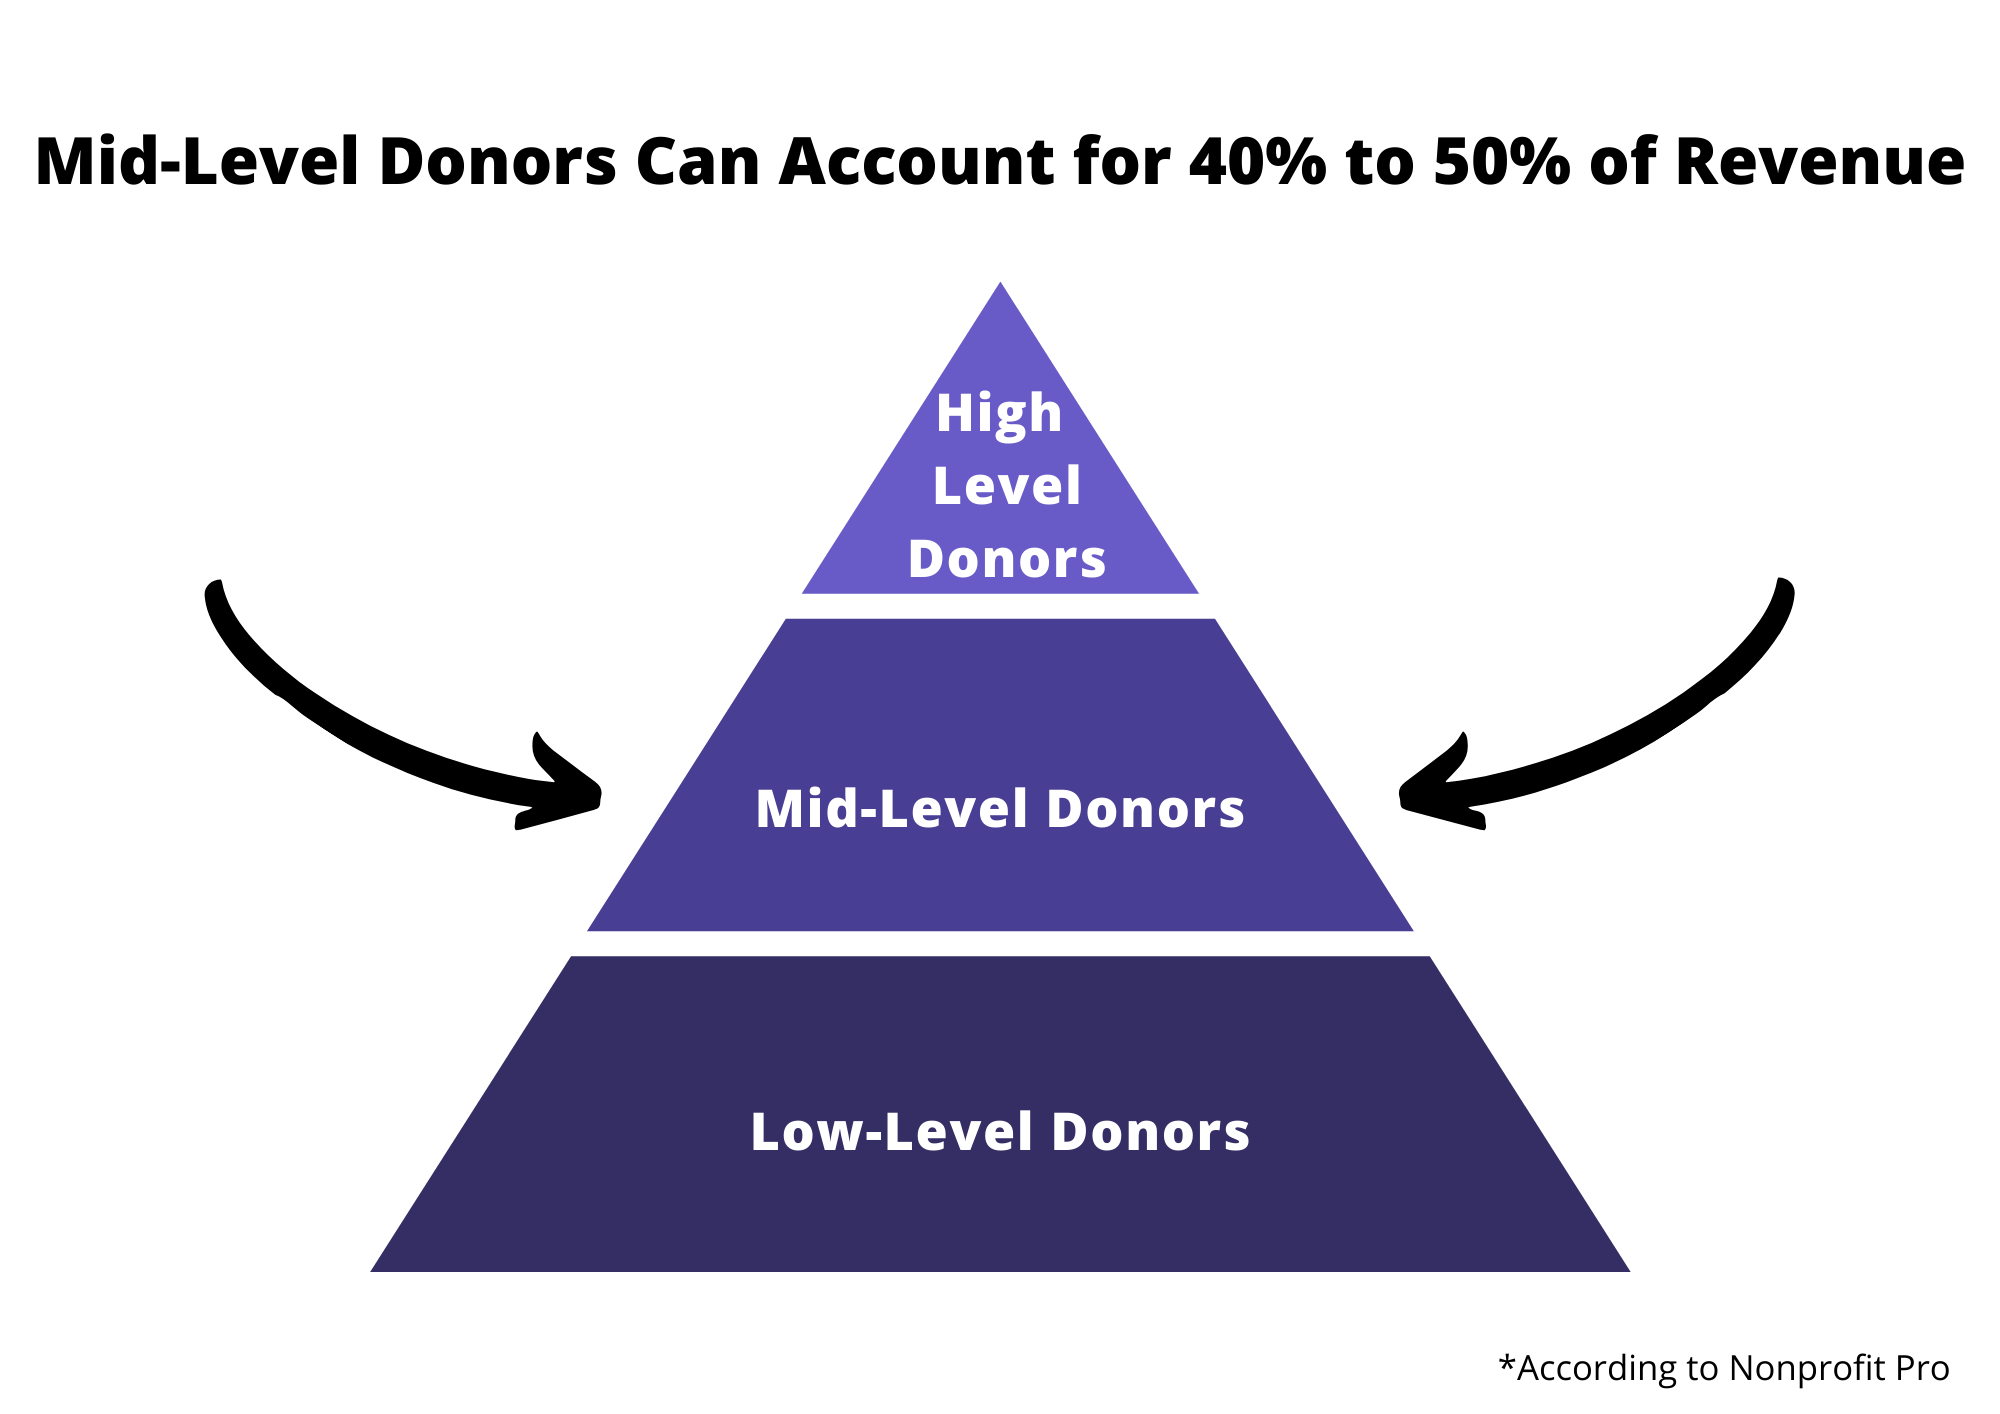 Mid-level donors can account to 40%-50% of revenue